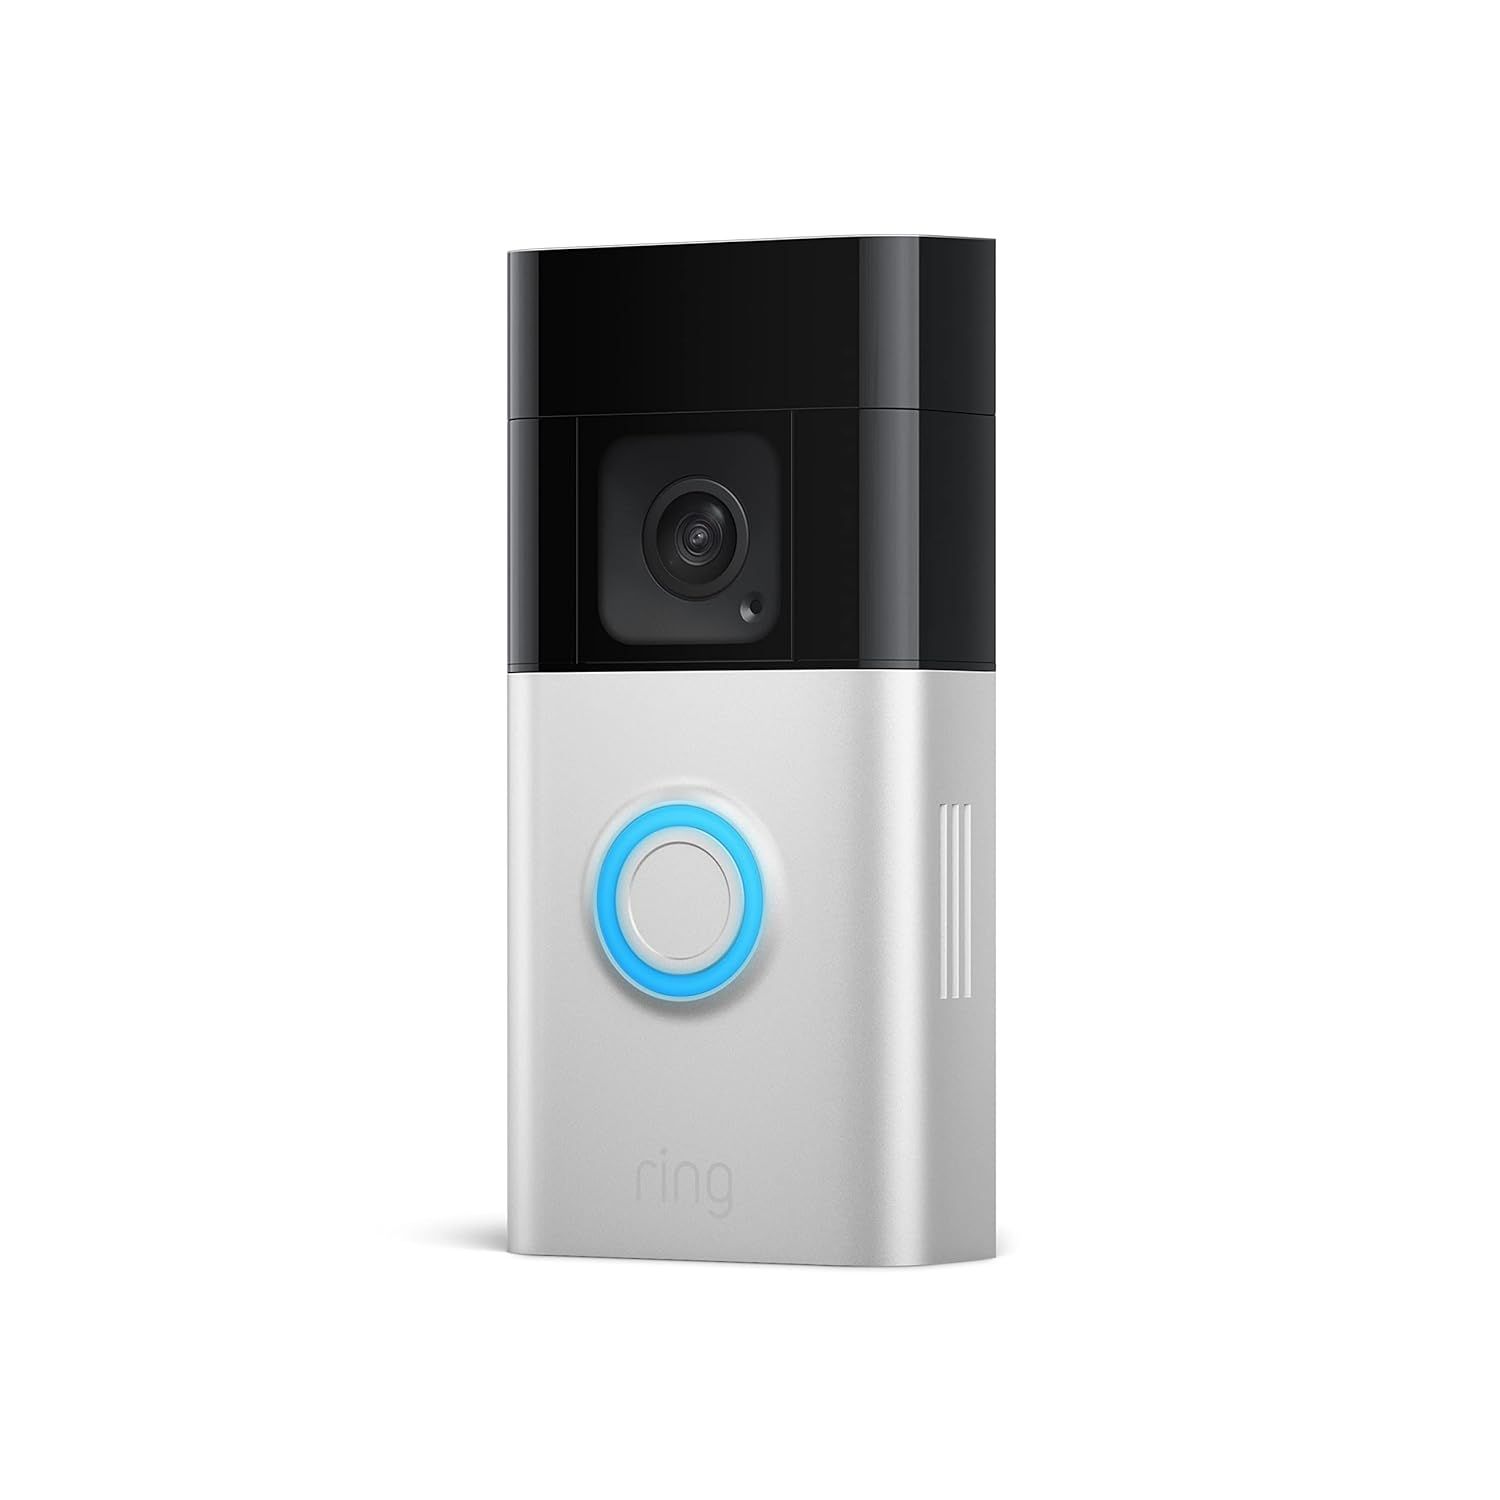 Ring Battery Doorbell Plus | Head-to-Toe HD+ Video, motion detection & alerts, and Two-Way Talk (... | Amazon (US)